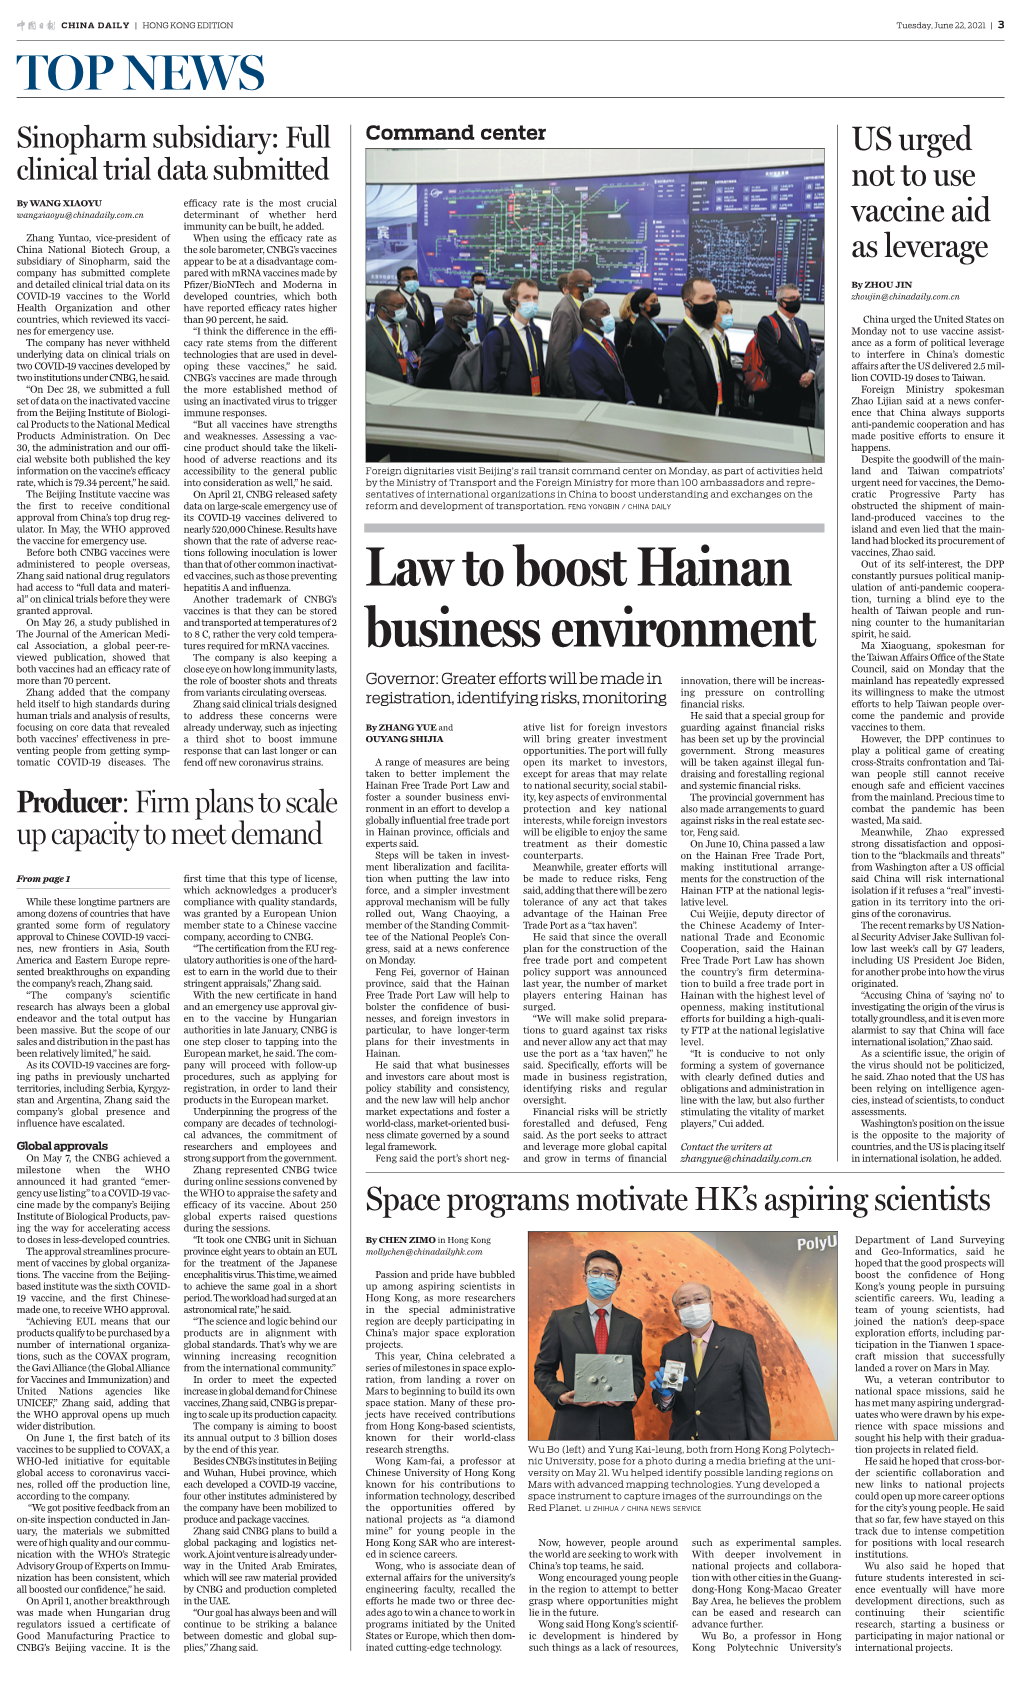 Law to Boost Hainan Business Environment